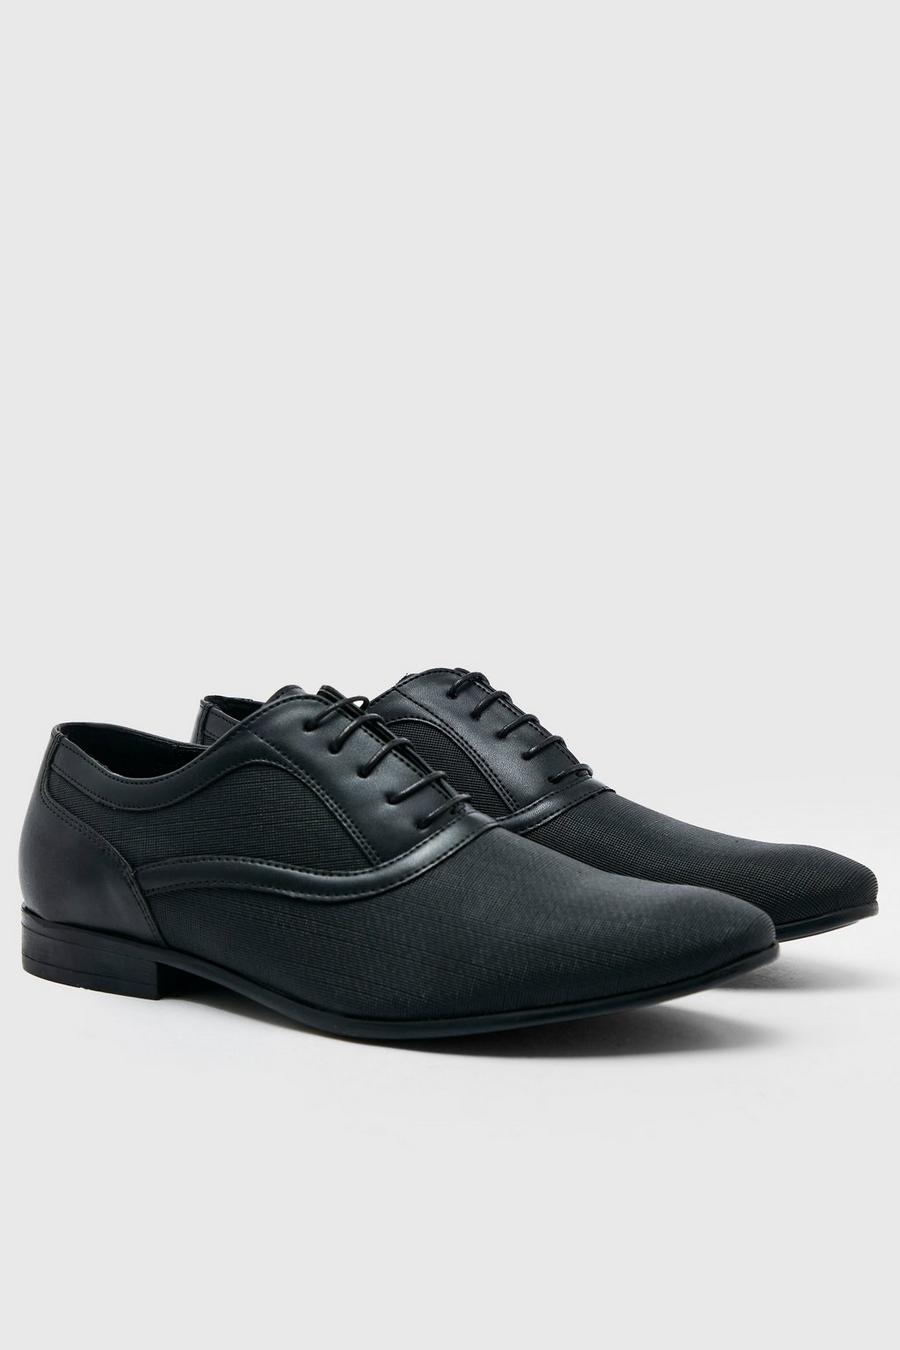 Black negro Embossed Faux Leather Oxford